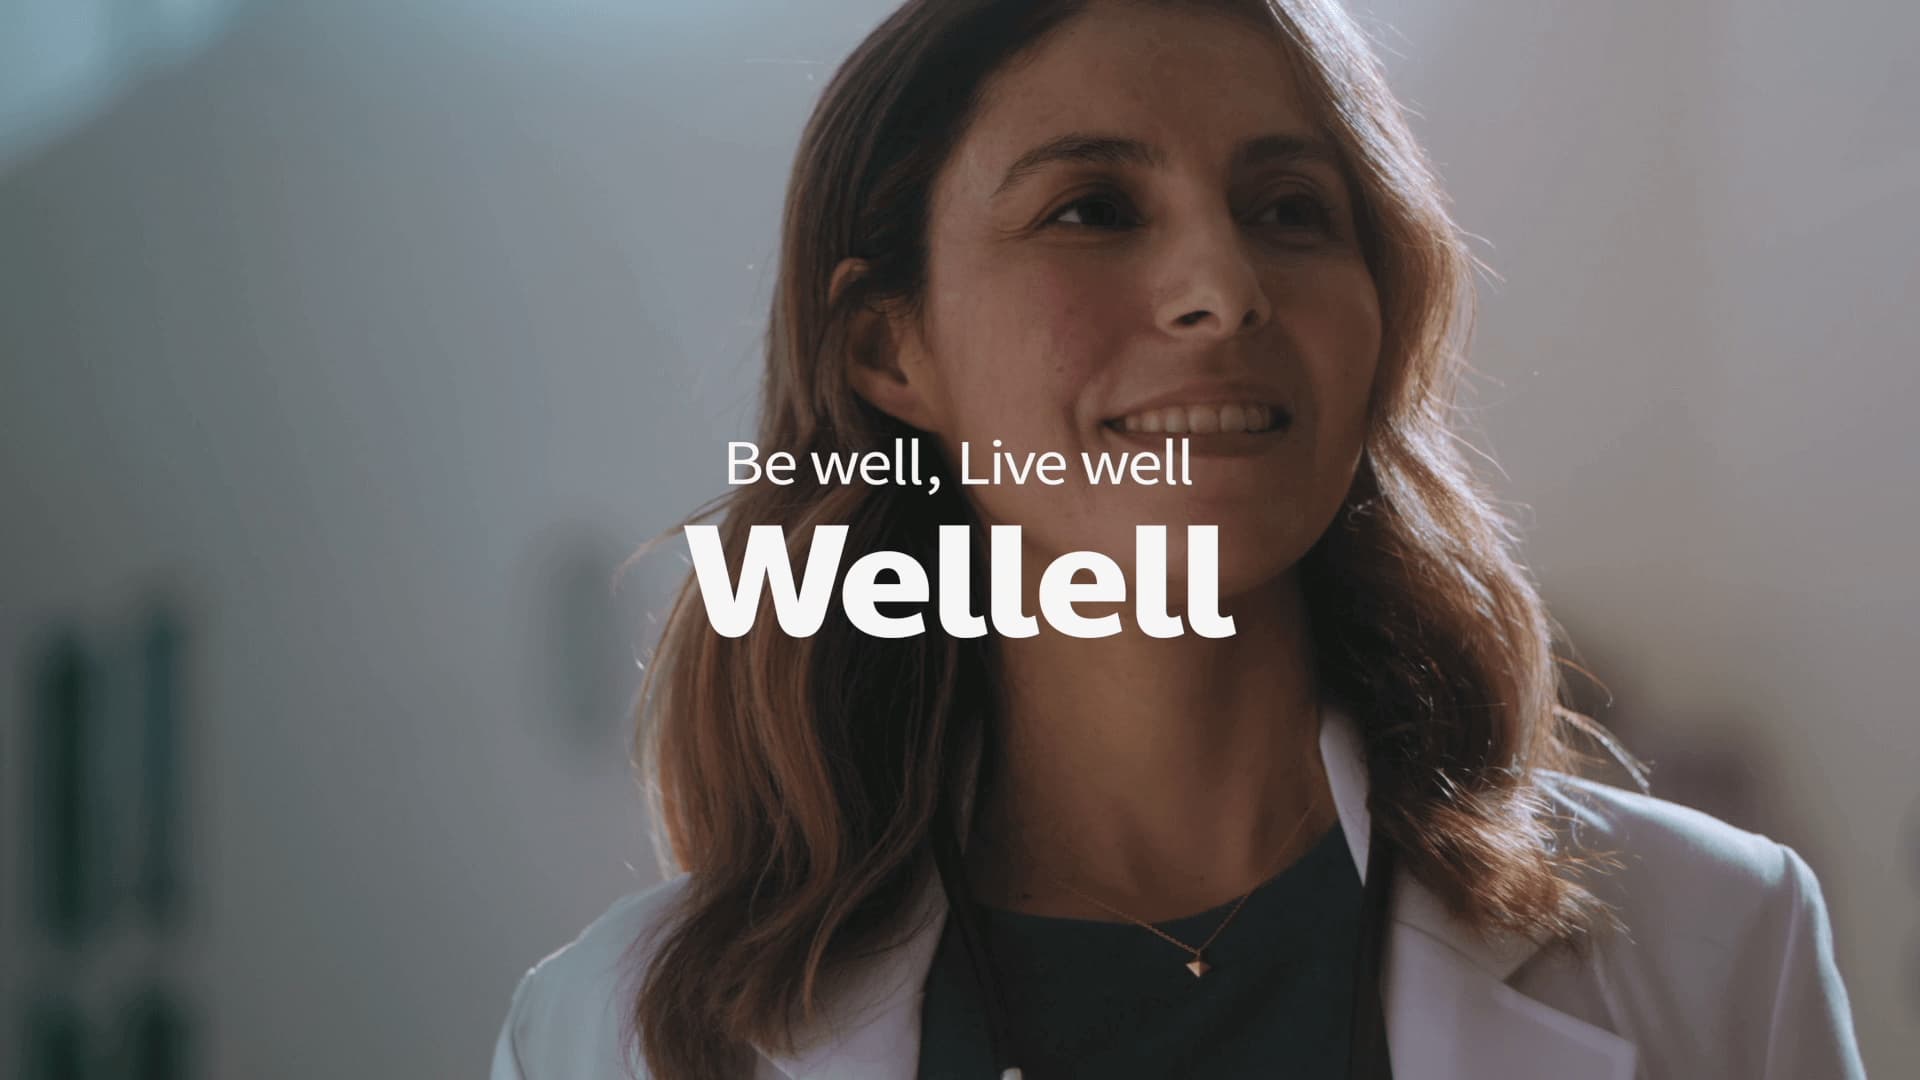 Life, Joy, and Well-Being are Wellell's Source of Motivation - Wellell